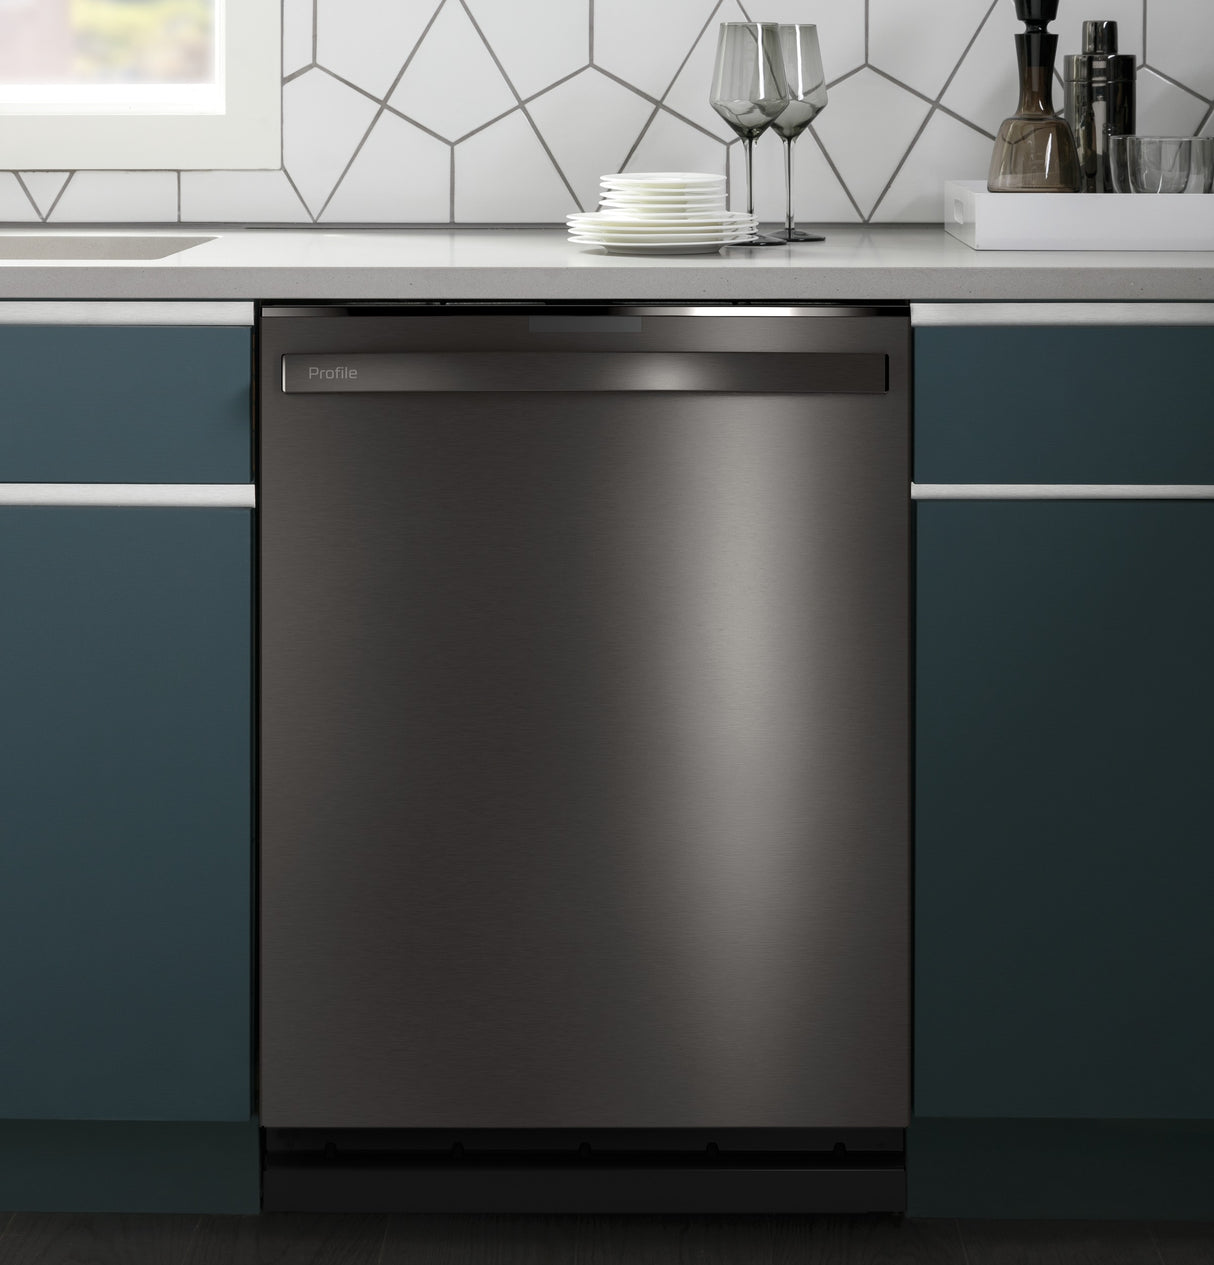 GE Profile(TM) ENERGY STAR(R) Top Control with Stainless Steel Interior Dishwasher with Sanitize Cycle & Twin Turbo Dry Boost - (PDT775SBNTS)